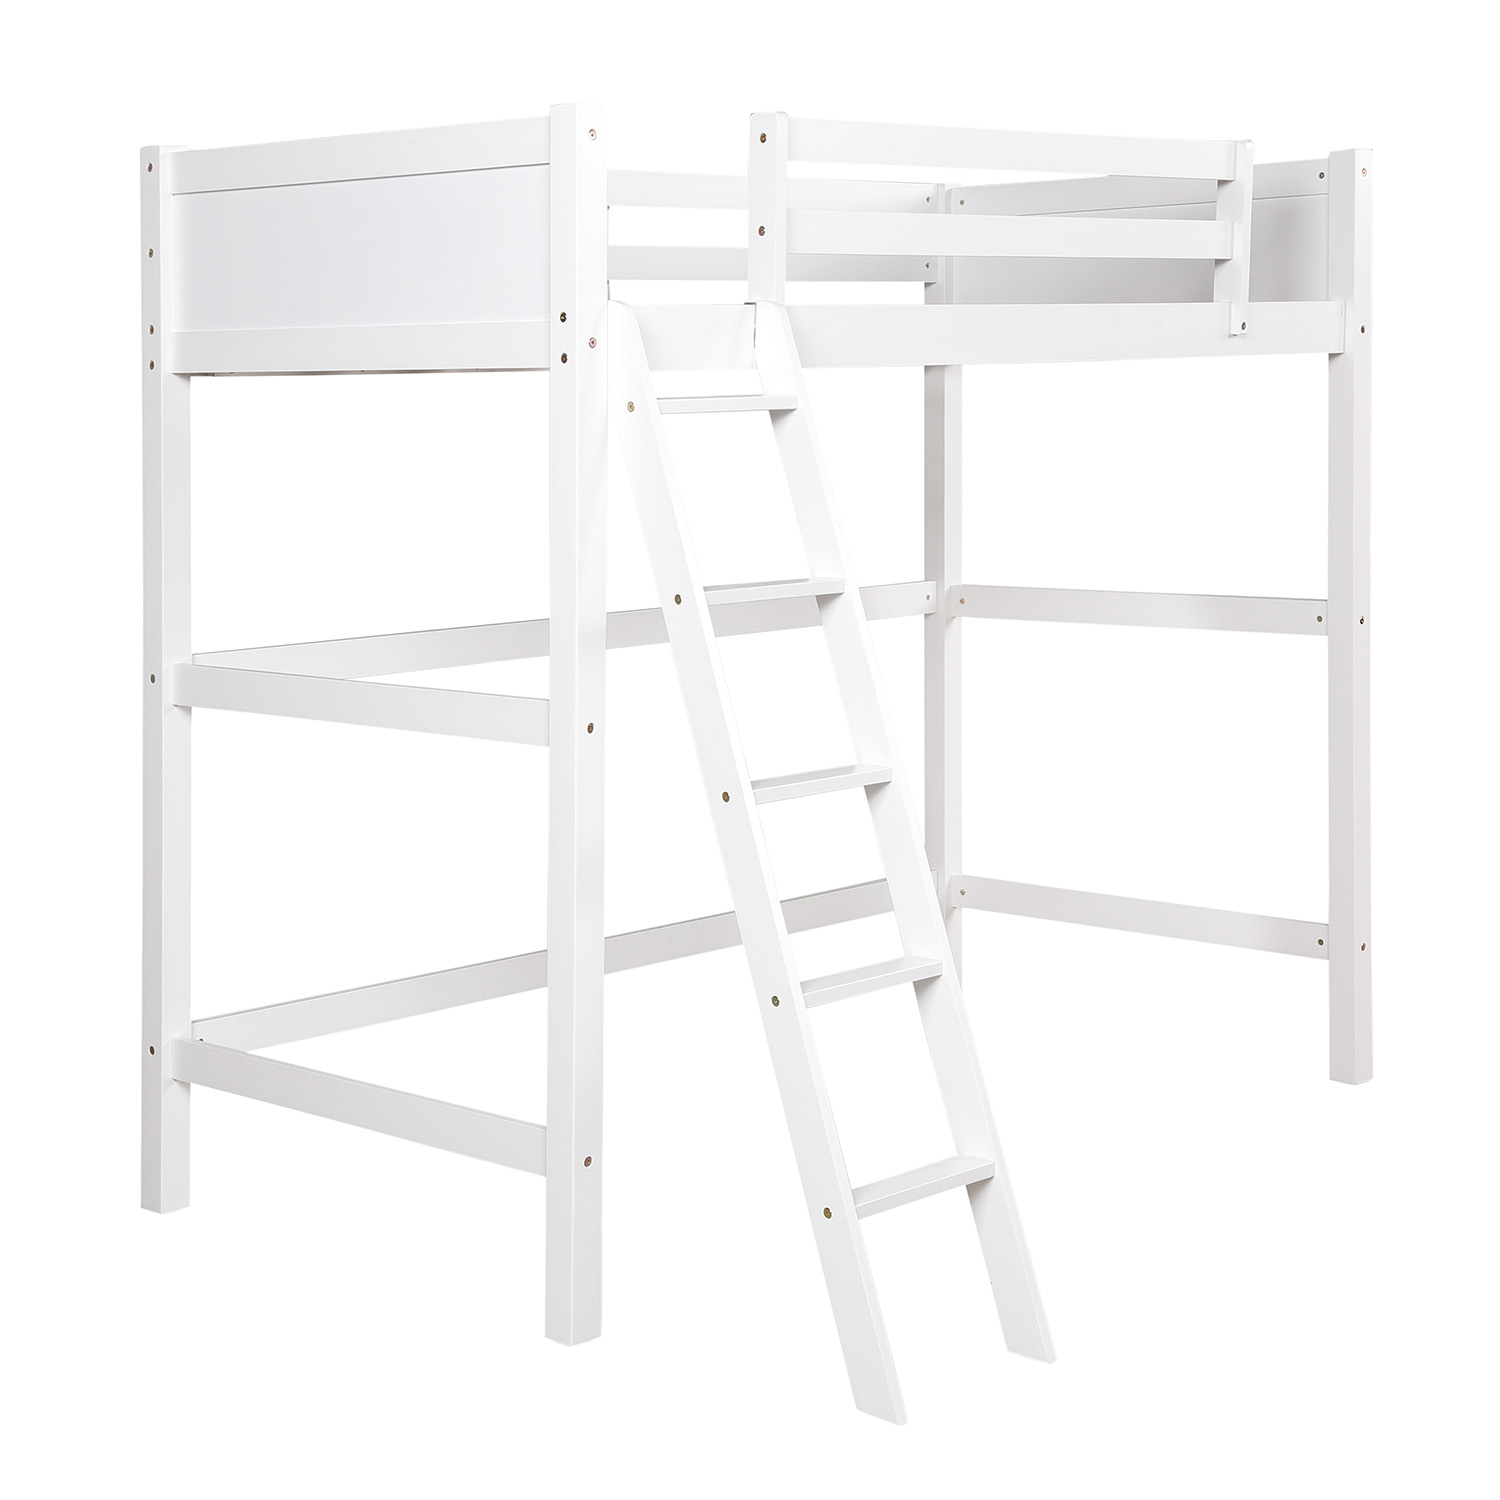 Moda Furnishings Solid Wood Twin Size, Target Bunk Bed Ladder